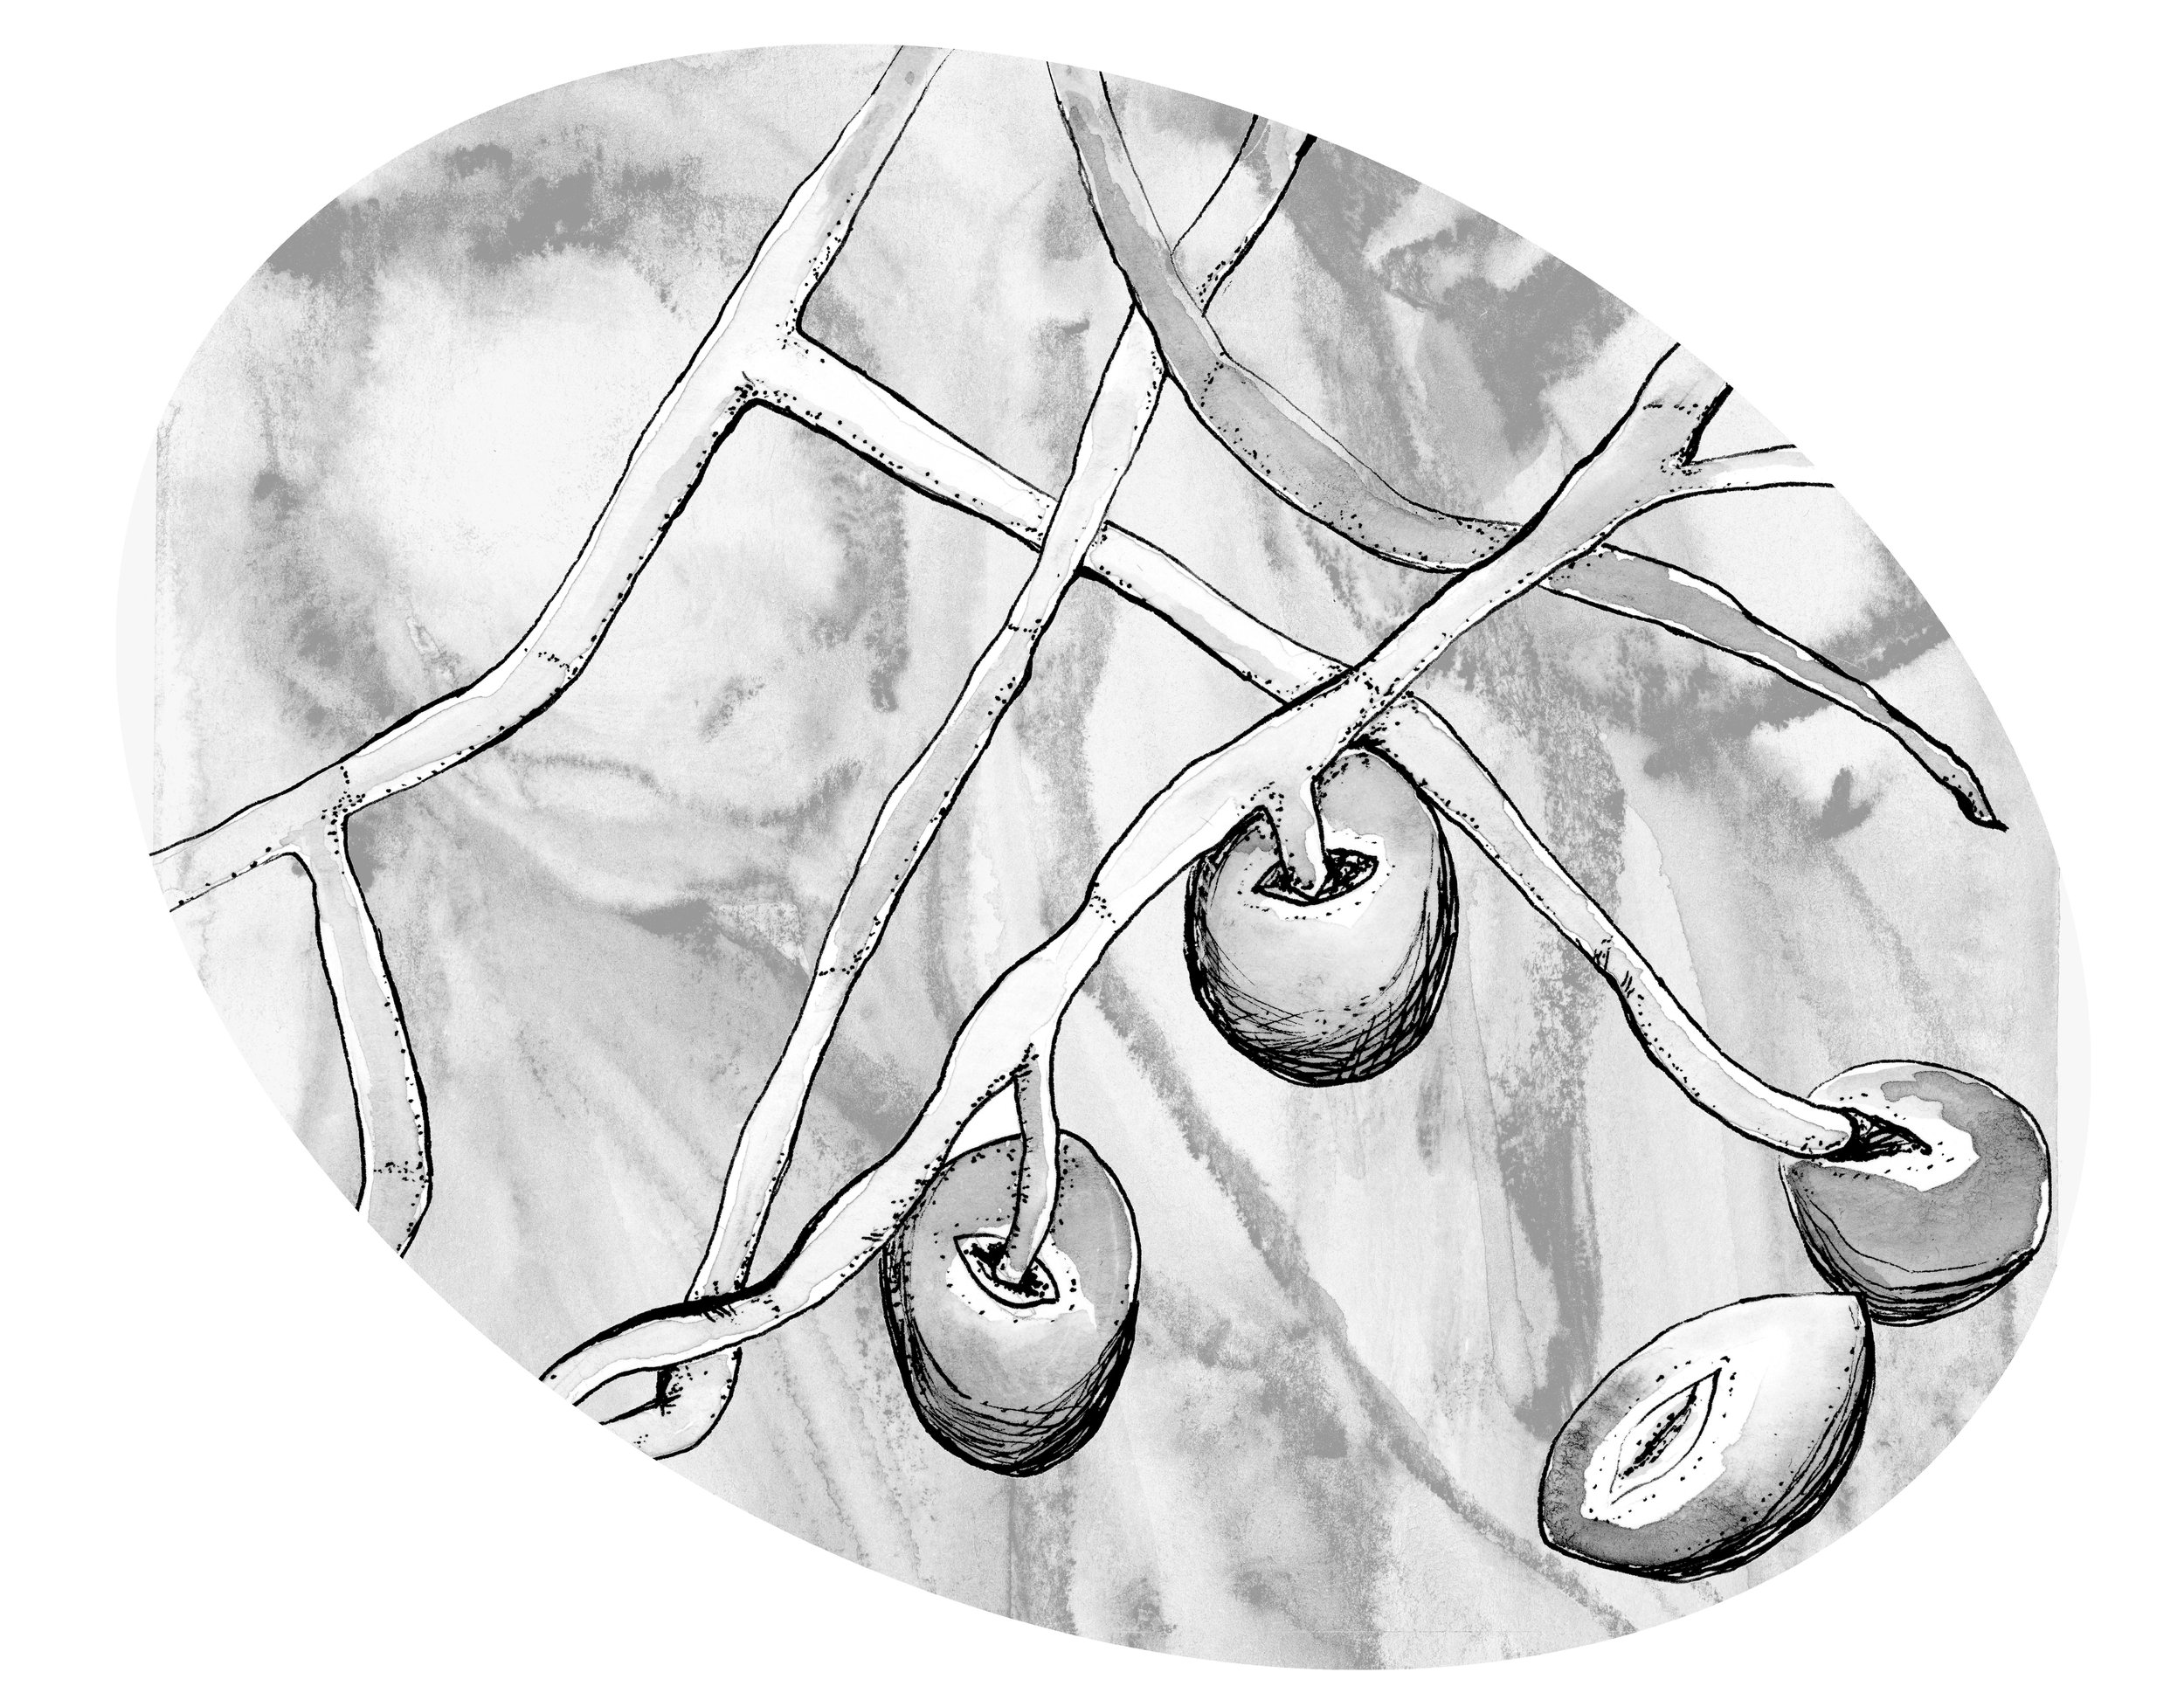  Hypehae Invade the Leaf’s Stomata, from the book  Blight: Fungi and the Coming Pandemic , by Emily Monosson (Norton 2023) 